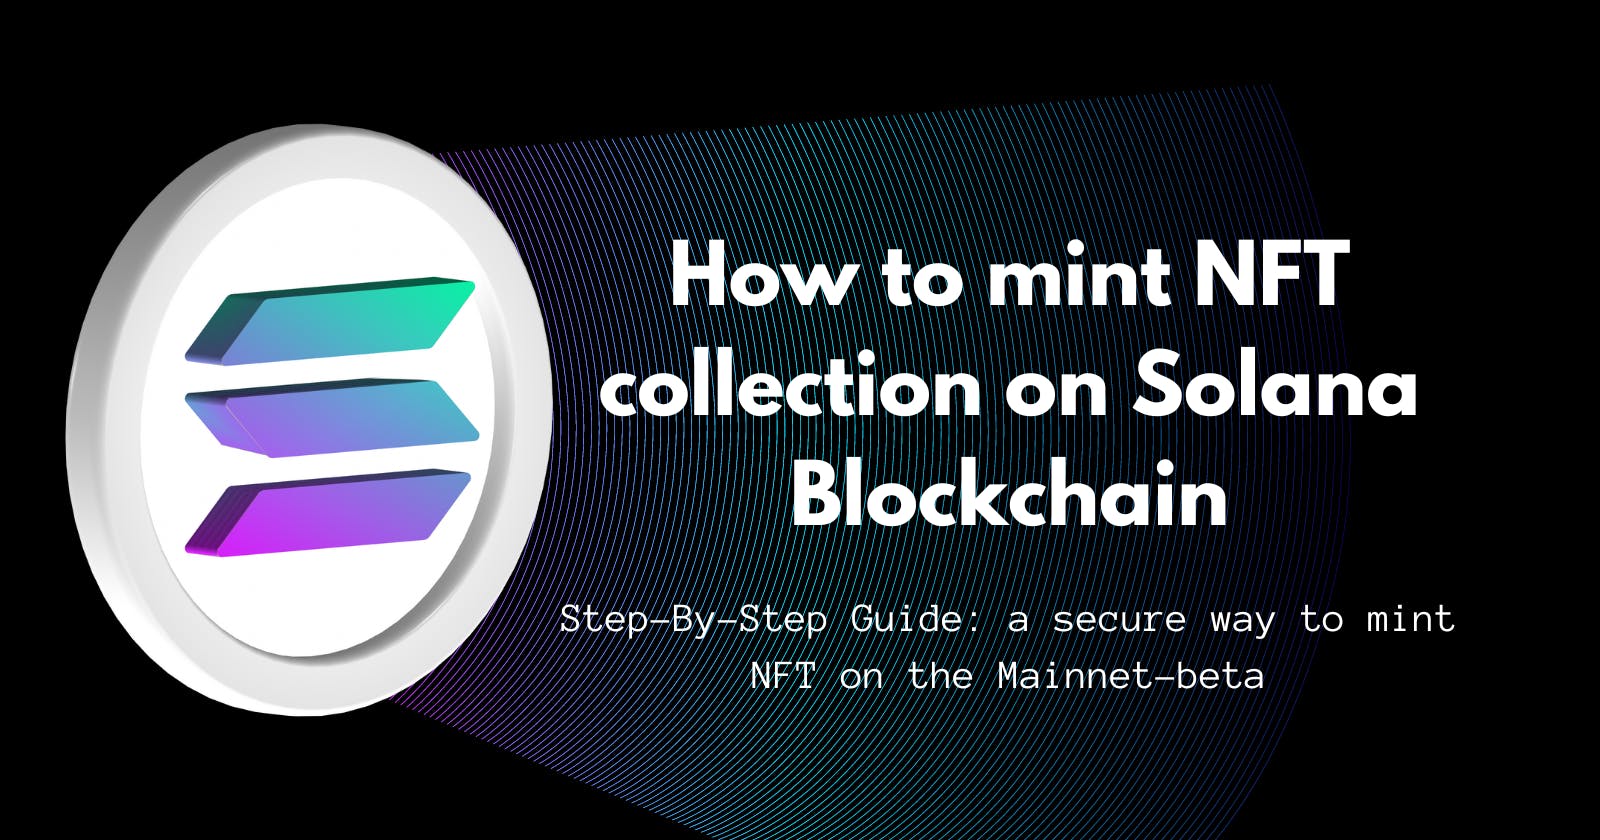 How to mint NFT collection on Solana Blockchain